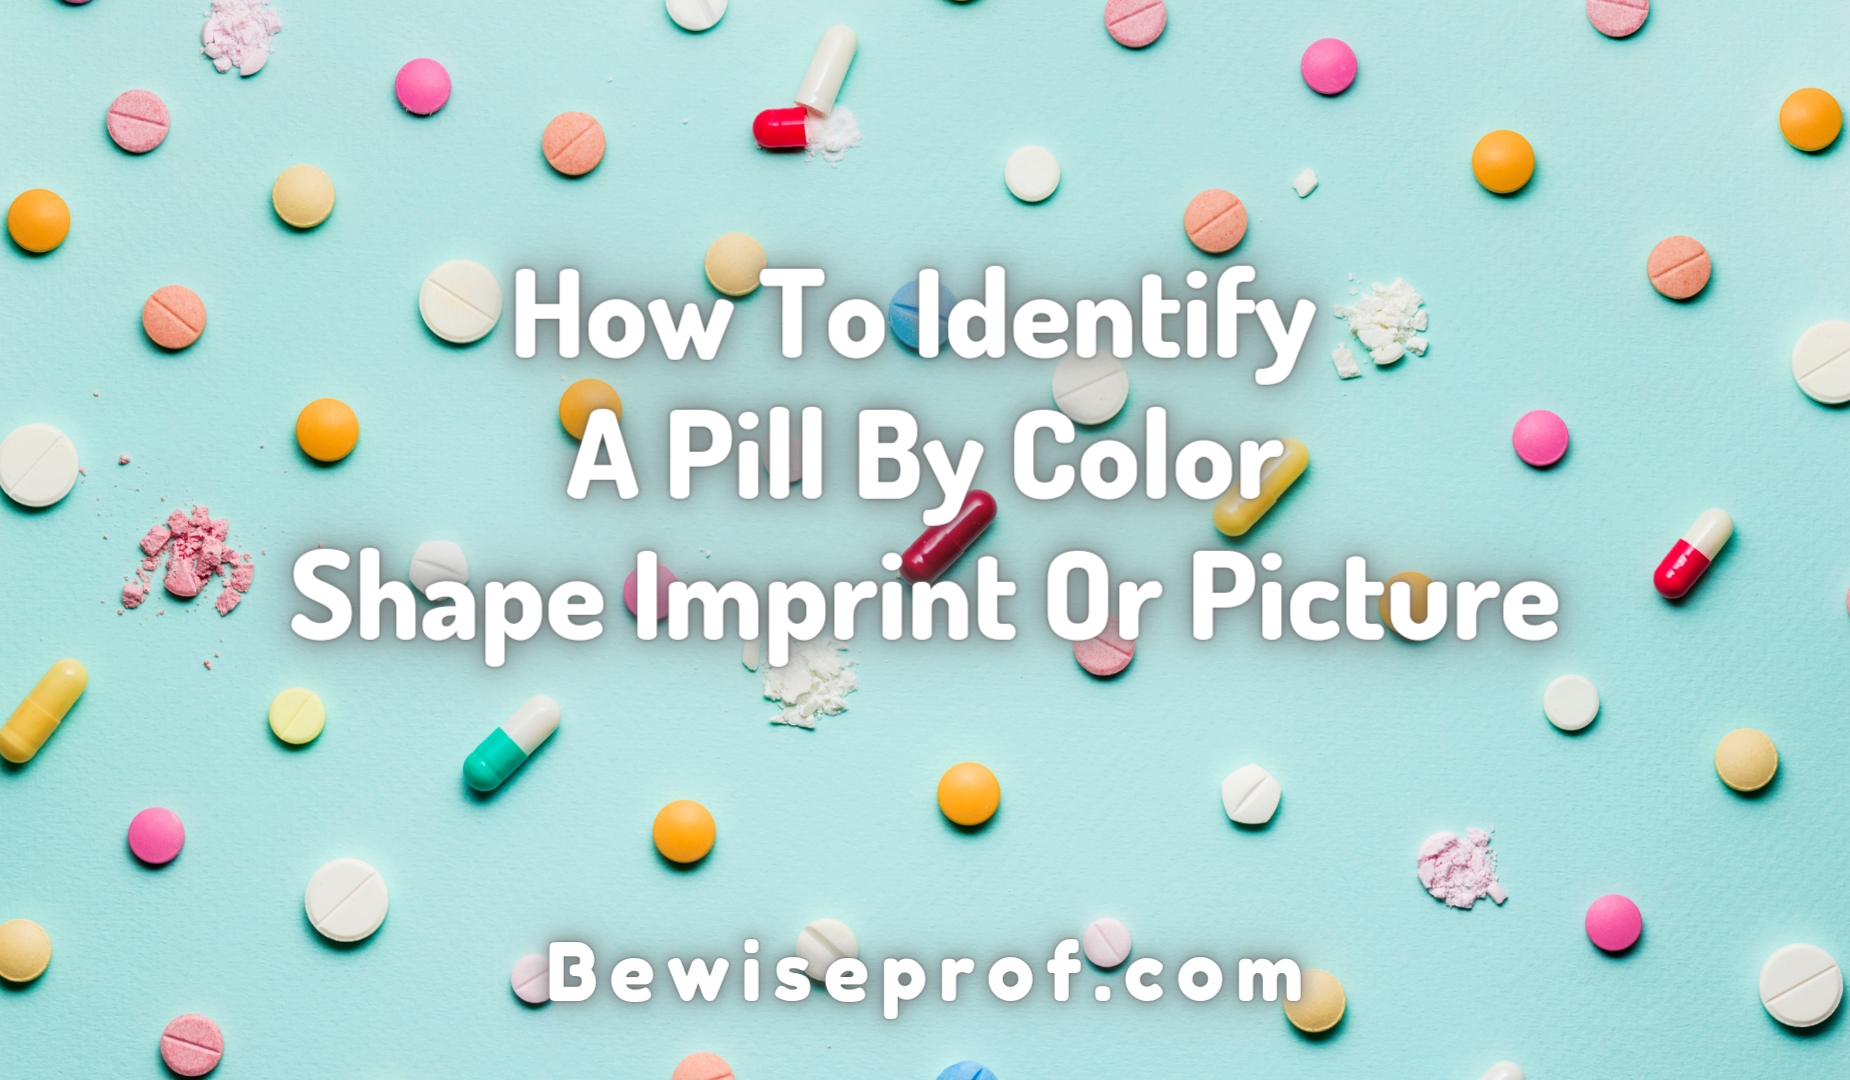 How To Identify A Pill